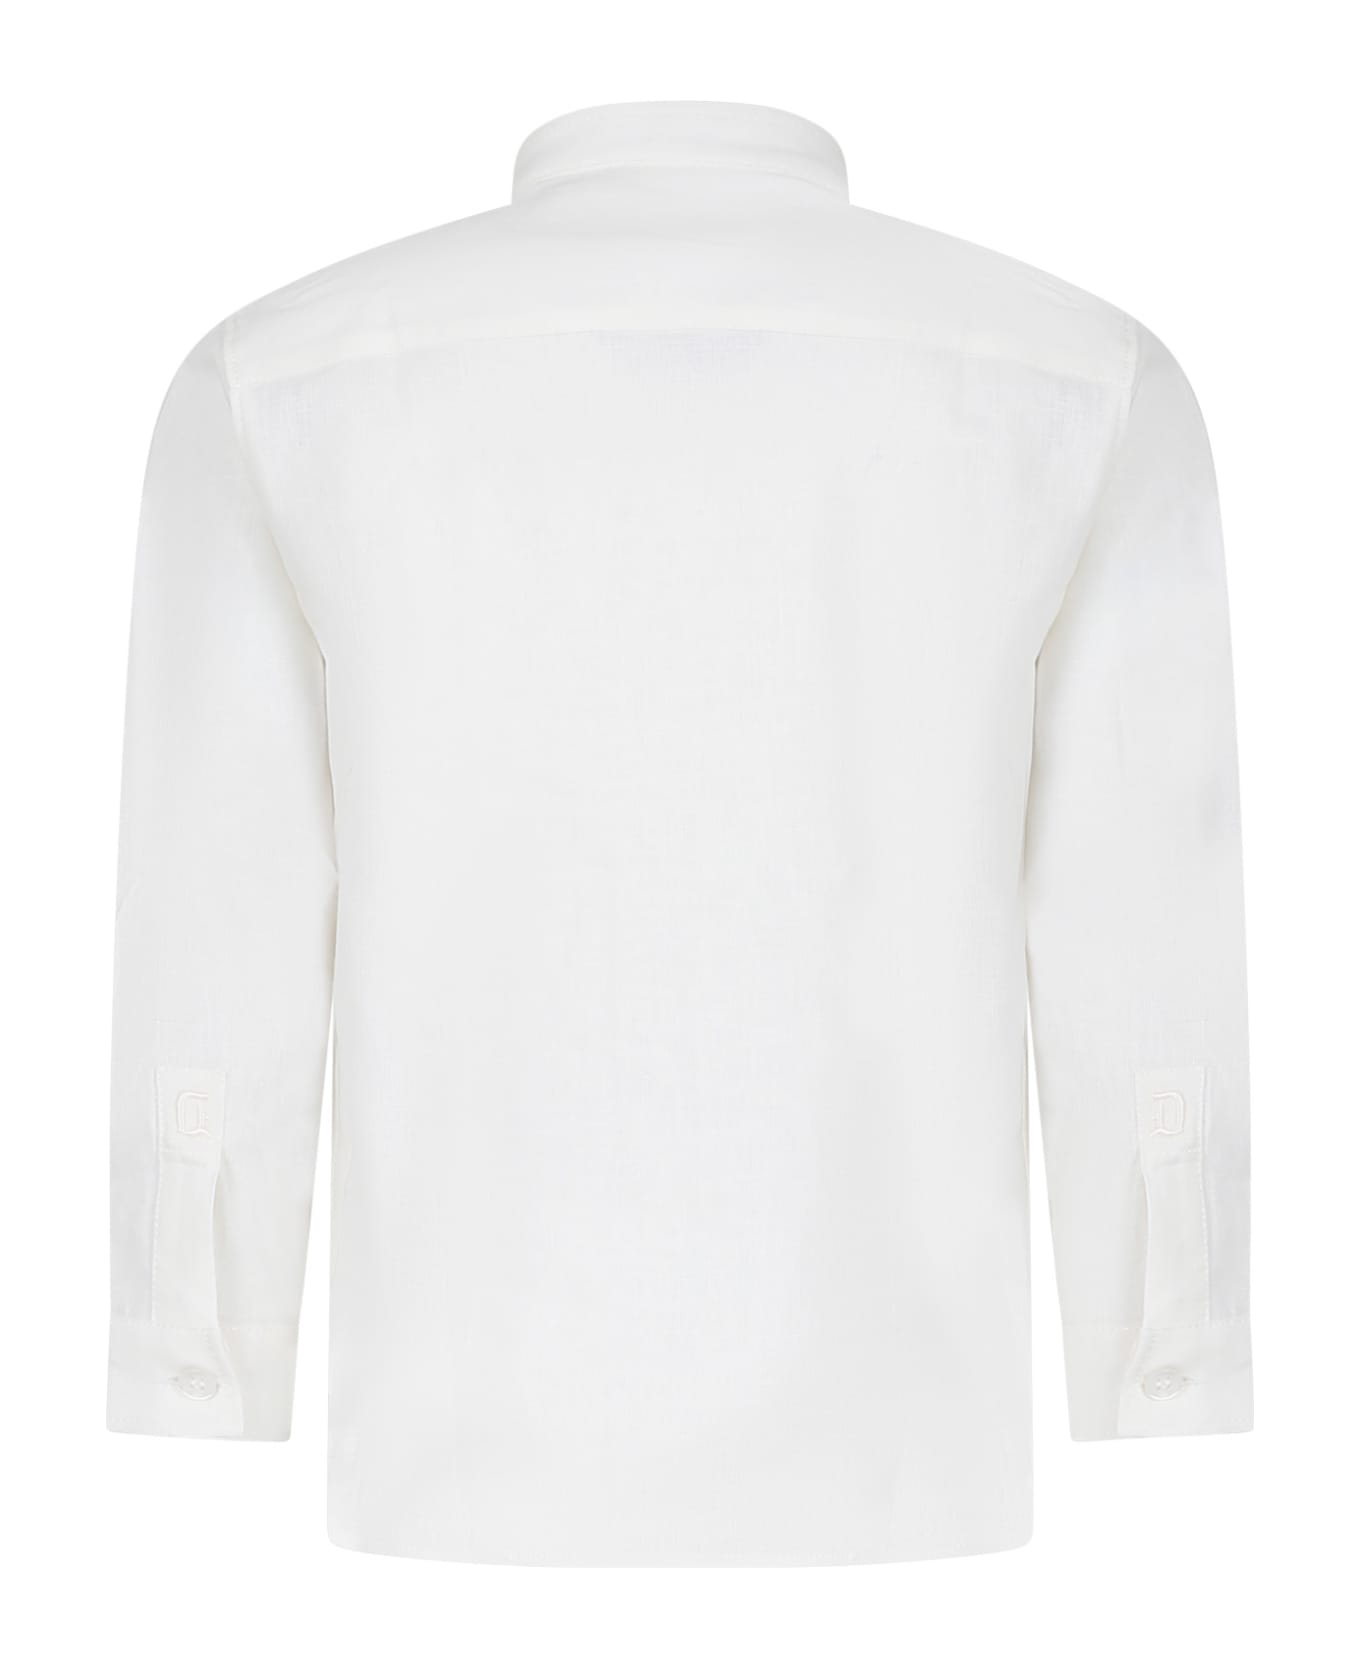 Dondup Ivory Shirt For Boy With Logo - White シャツ